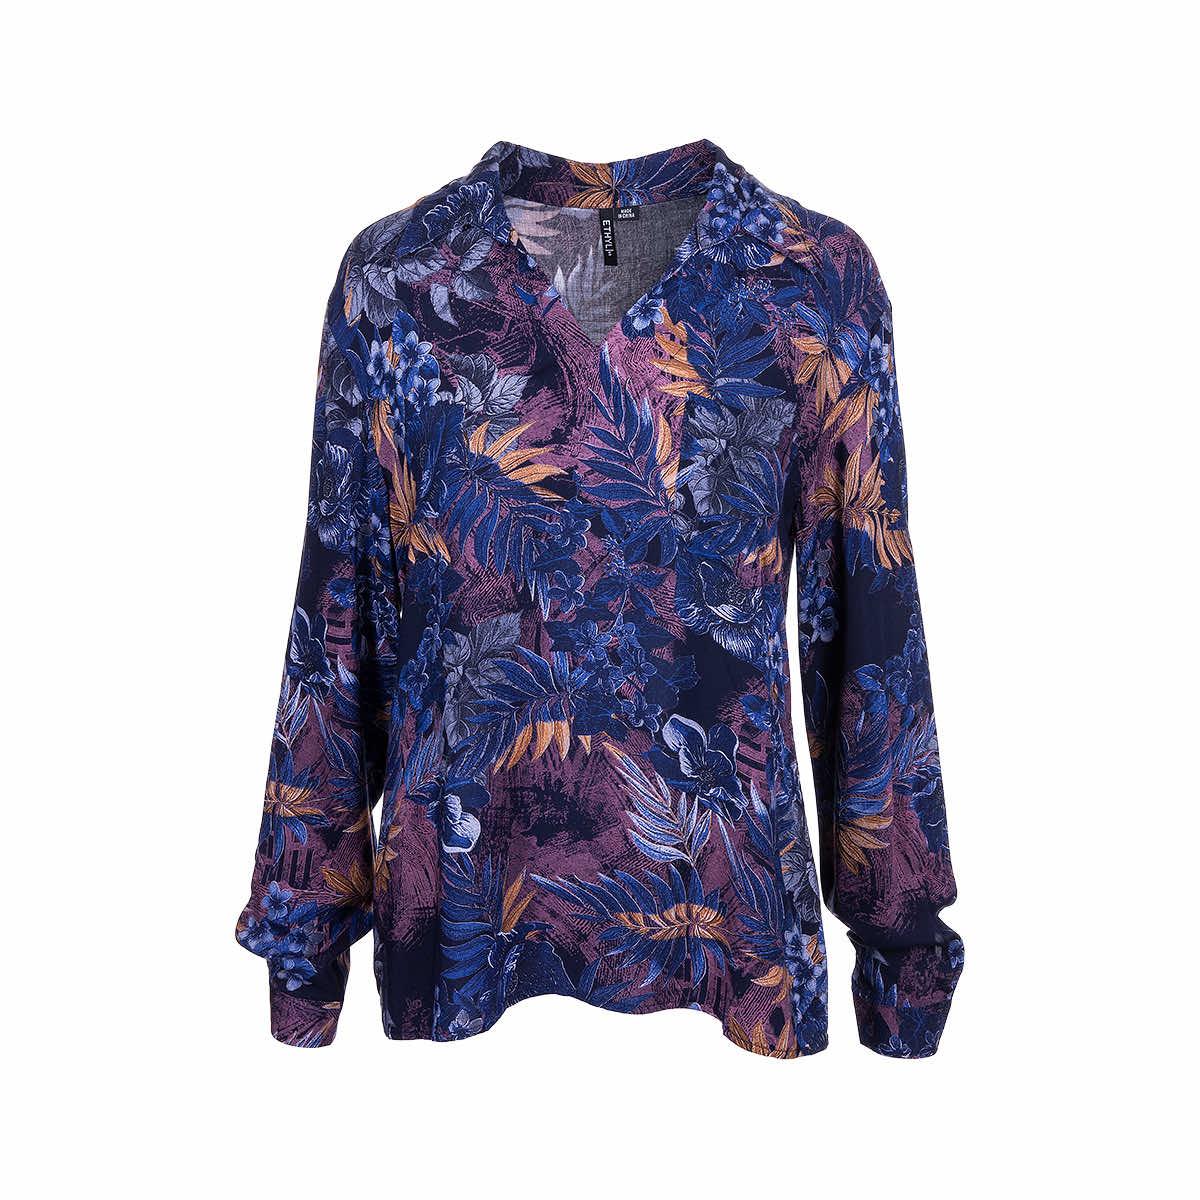  Women's Printed Woven Collared Top